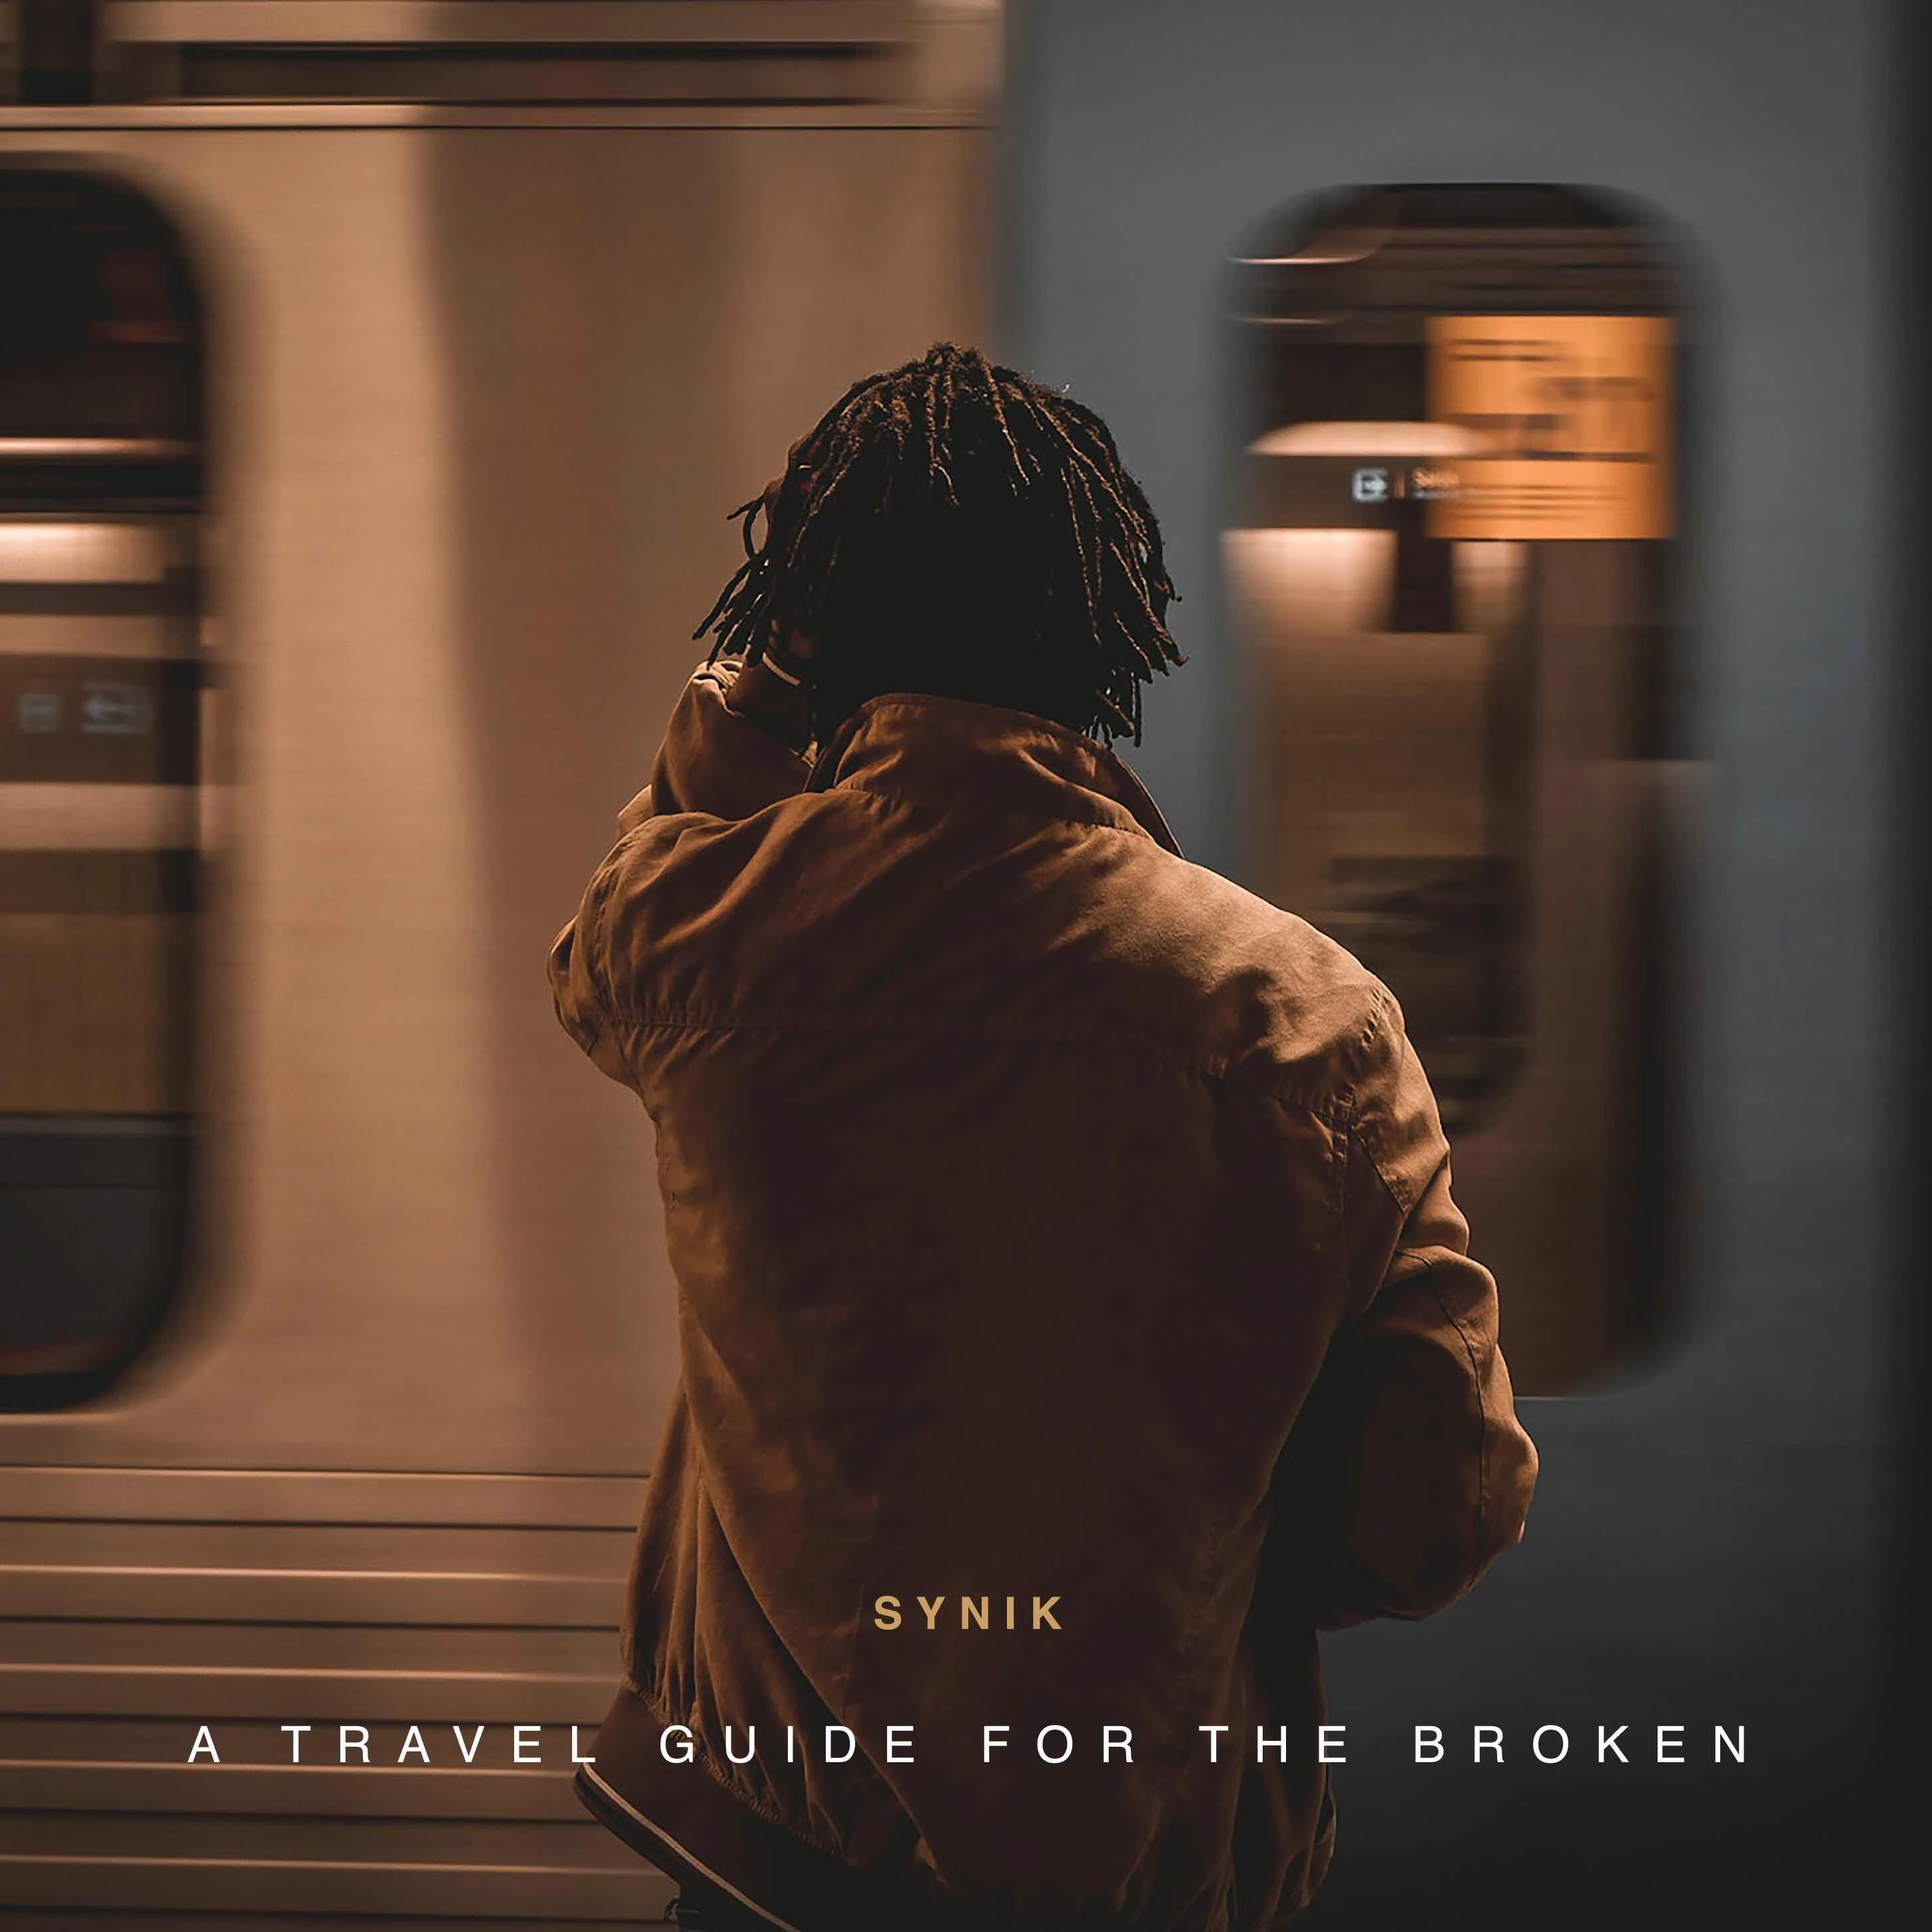 Album in Focus: A Travel Guide For The Broken By Synik